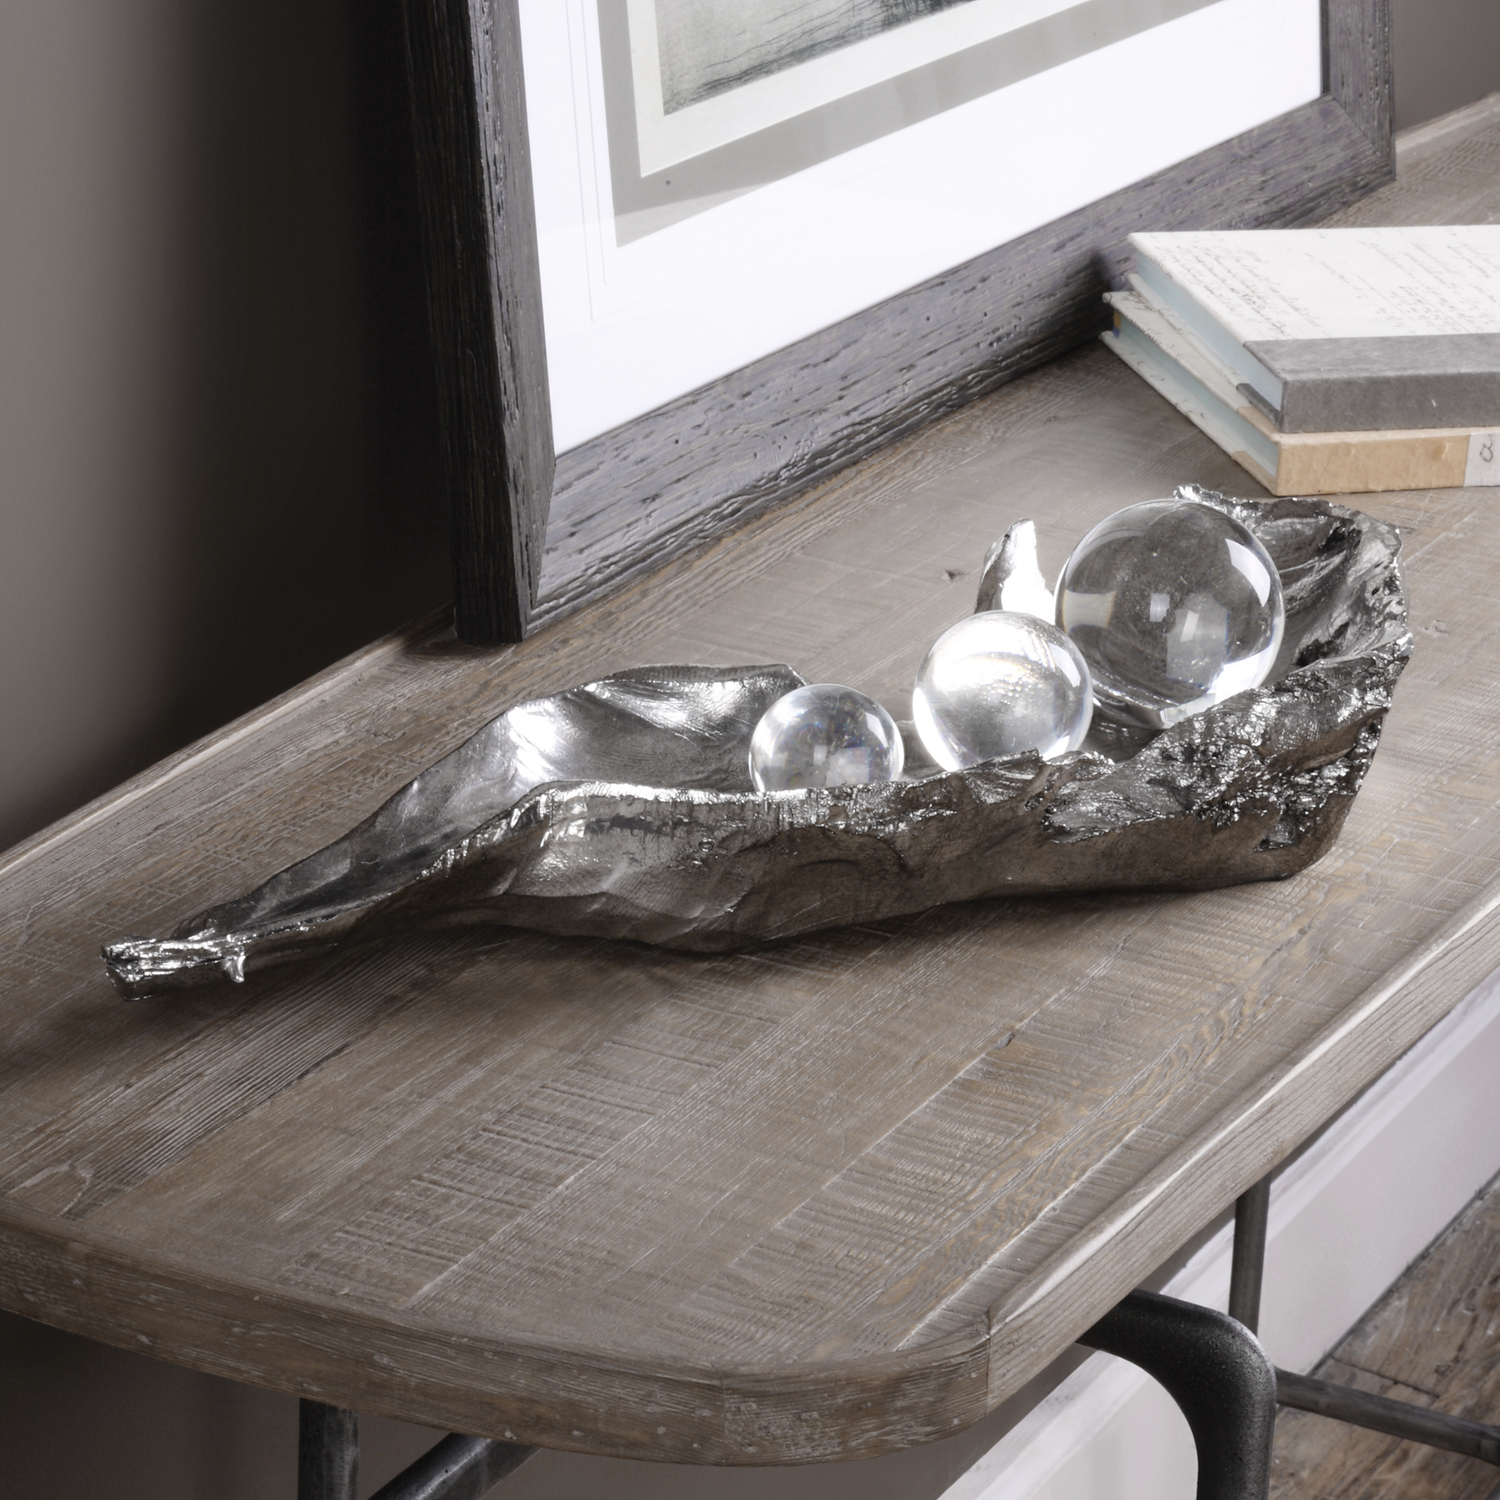 garden statues and decor Uttermost Figurines & Sculptures This Gorgeous Sculpture Simulates Peas Sitting On An Open Pod, Finished In A Tarnished, Metallic Silver With Clear Crystal Spheres.